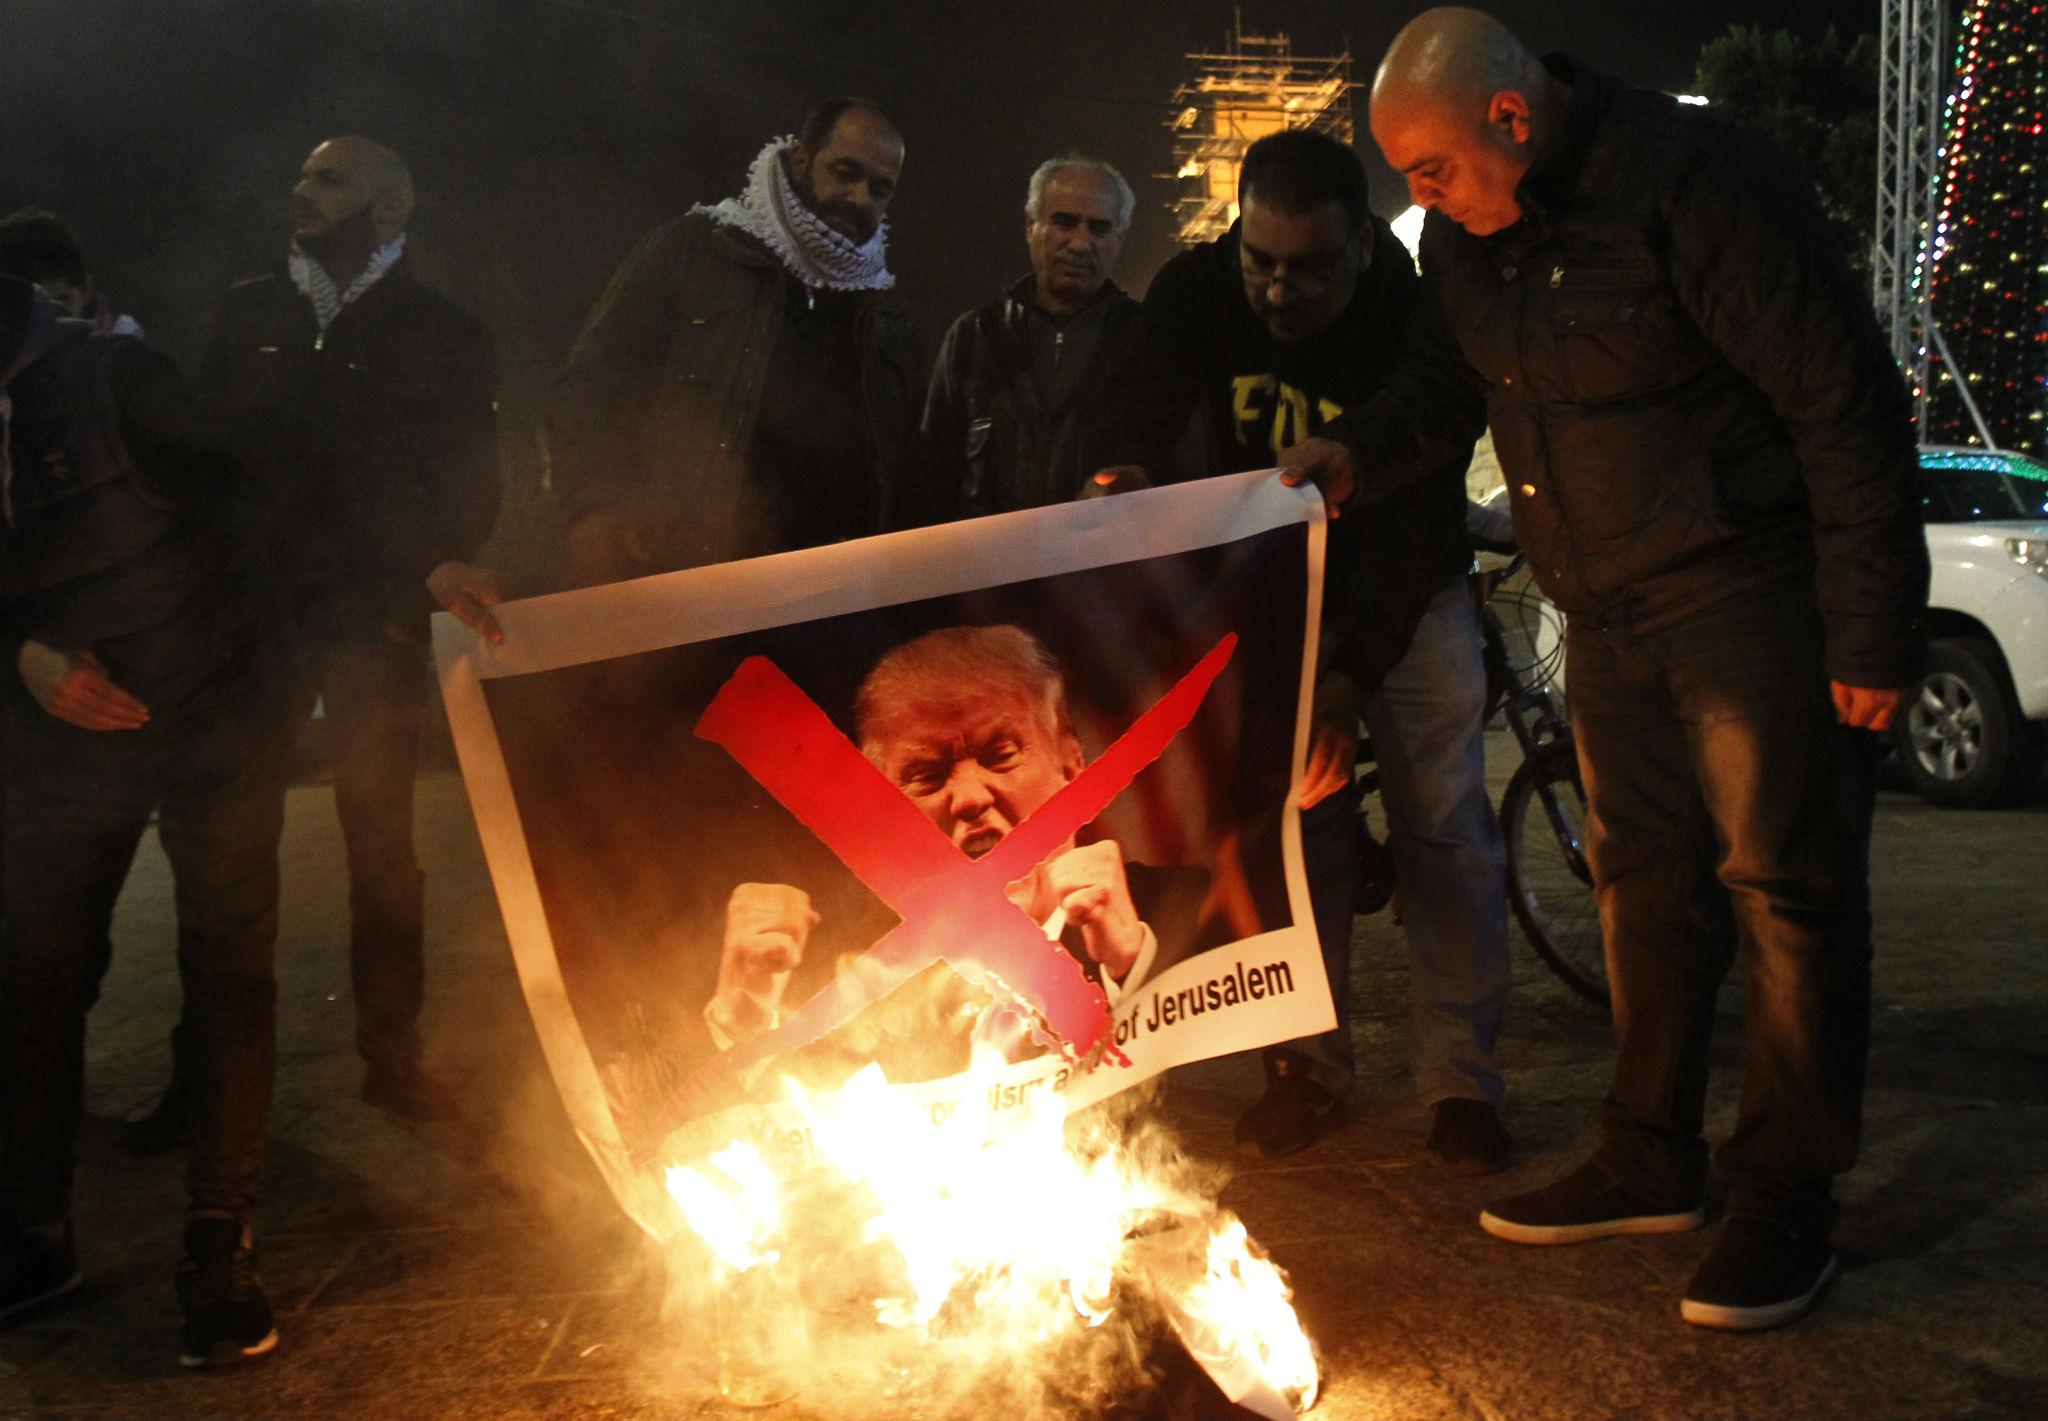 Palestinian protesters burn pictures of US President Donald Trump at the manger square in Bethlehem on December 5, 2017 (MUSA AL SHAER/AFP/Getty Images)